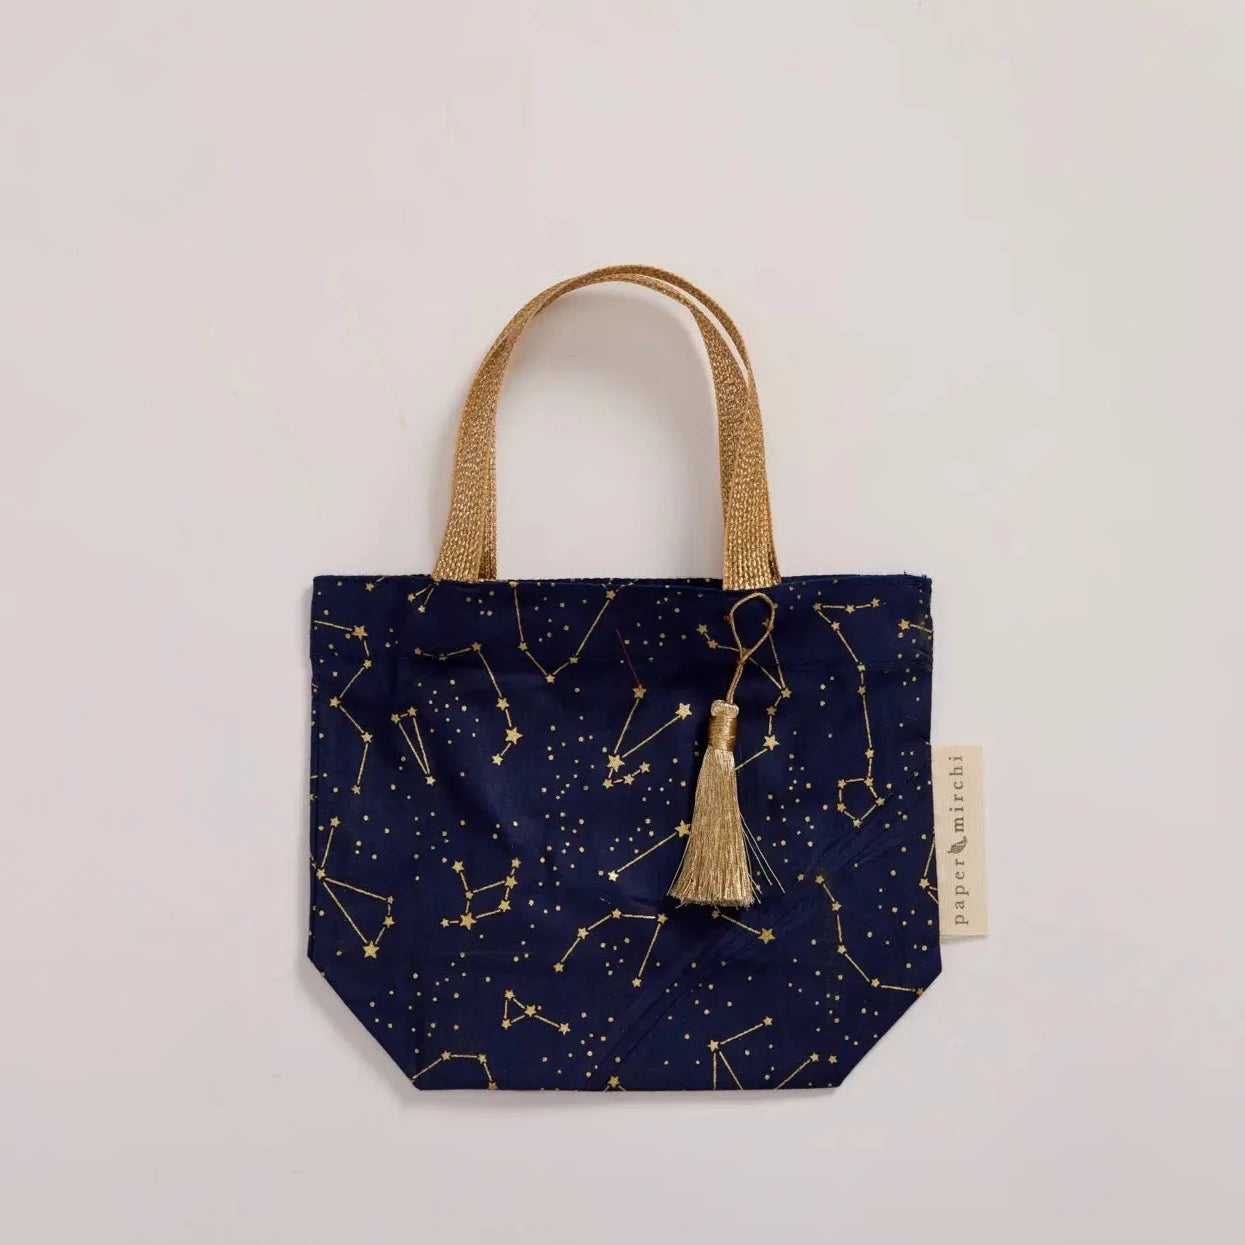 Reusable Fabric Gift Bags Tote Style - Night Sky by Paper Mirchi